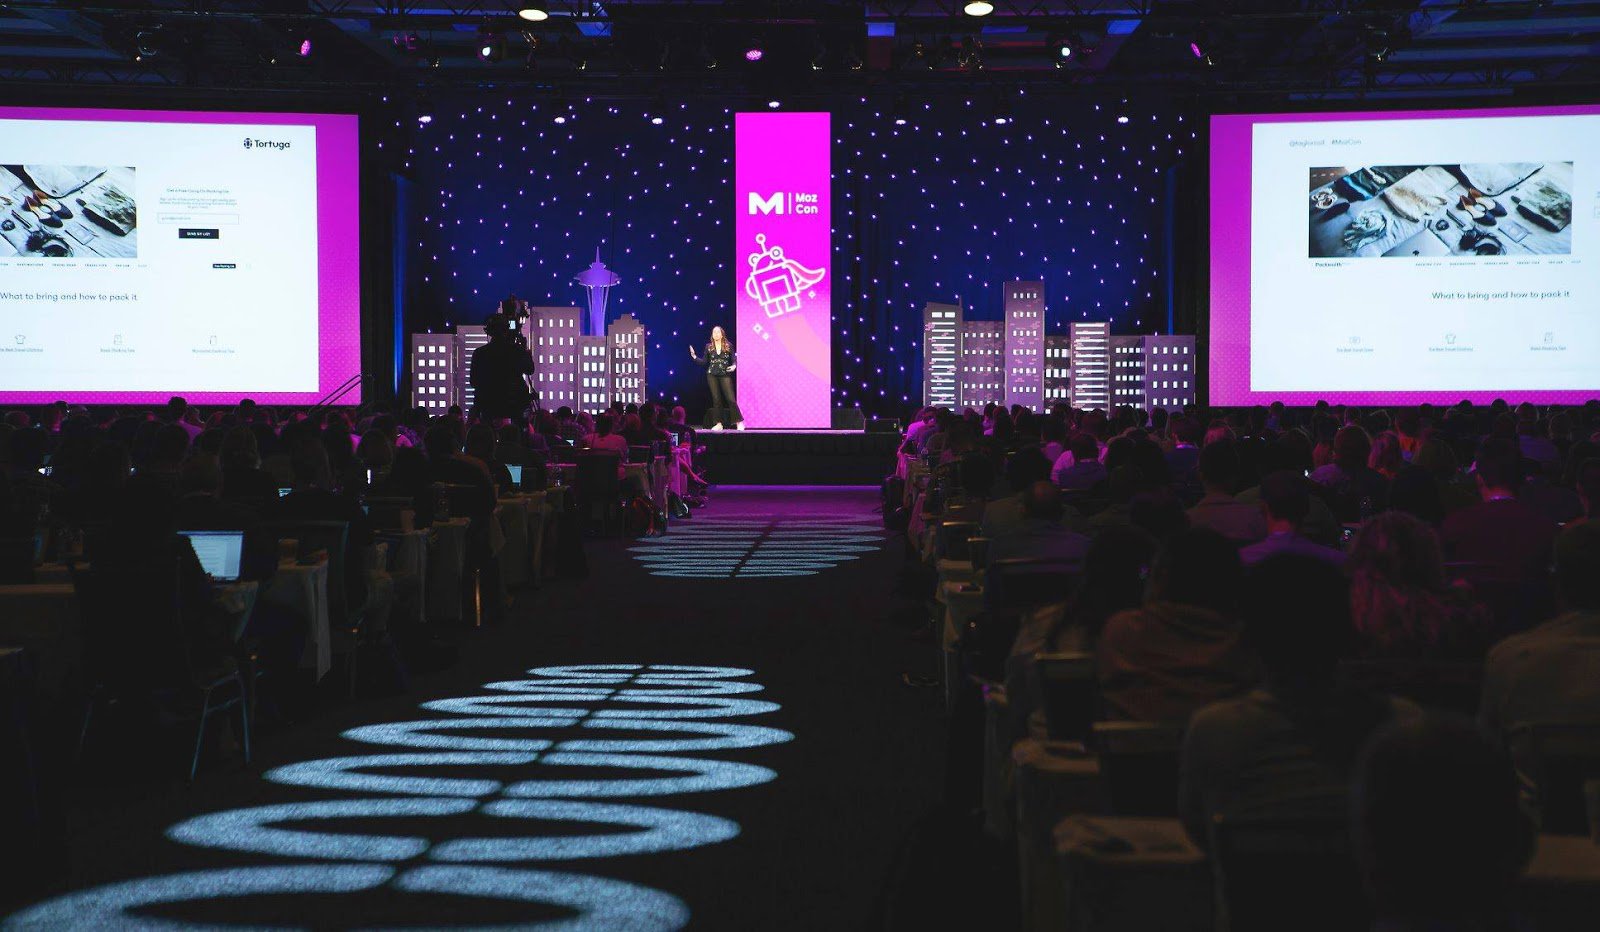 Step into the Spotlight as a Community Speaker at MozCon 2019